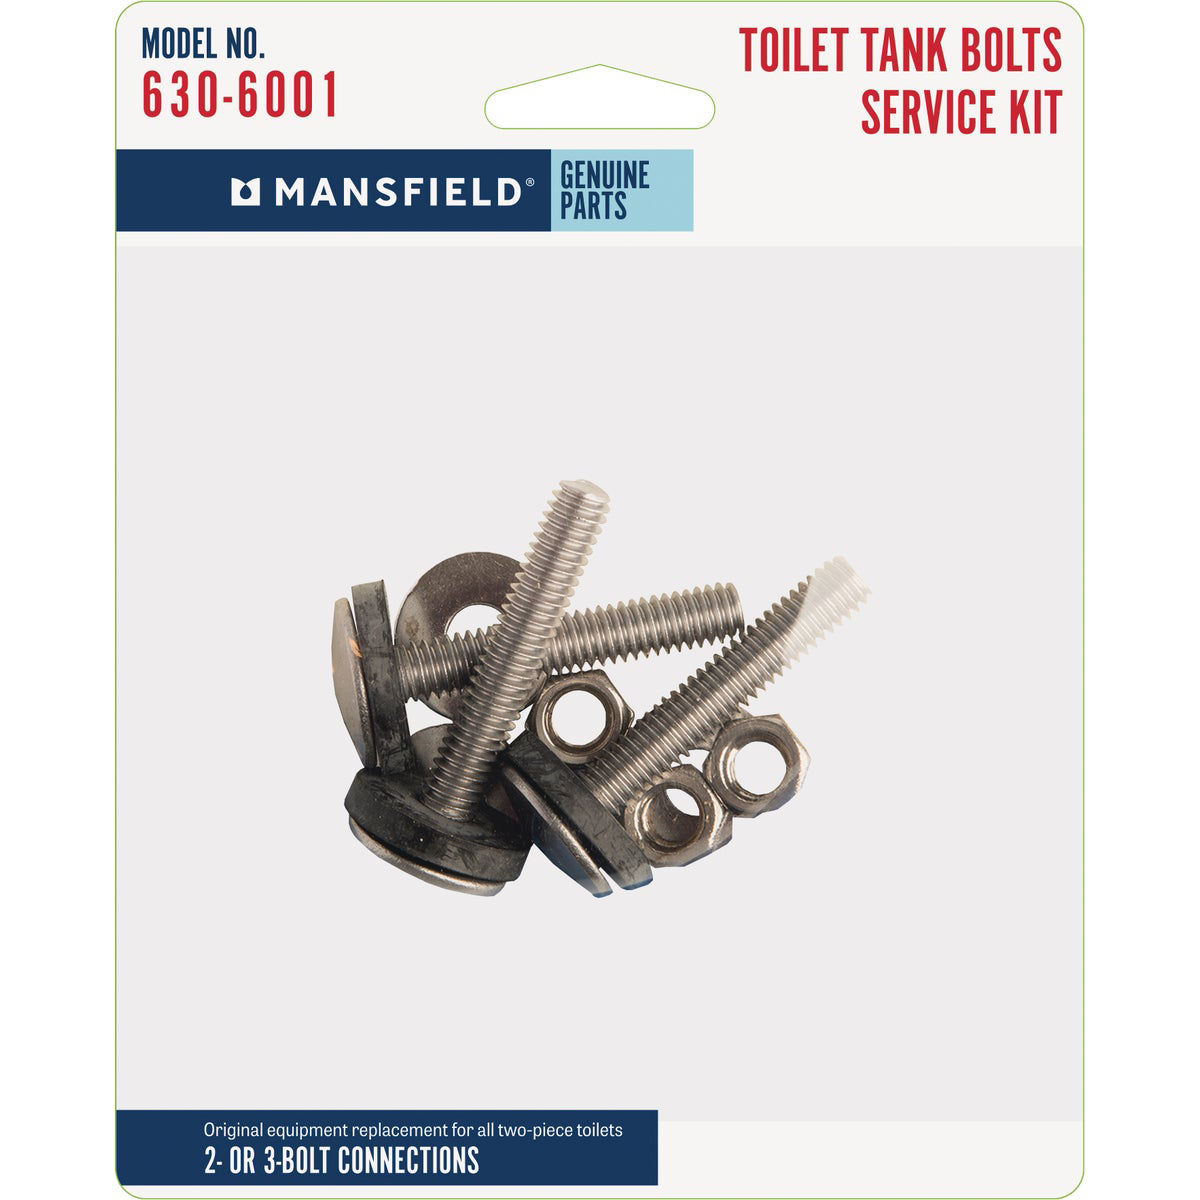 How to bolt down a Kohler tank with three bolts?